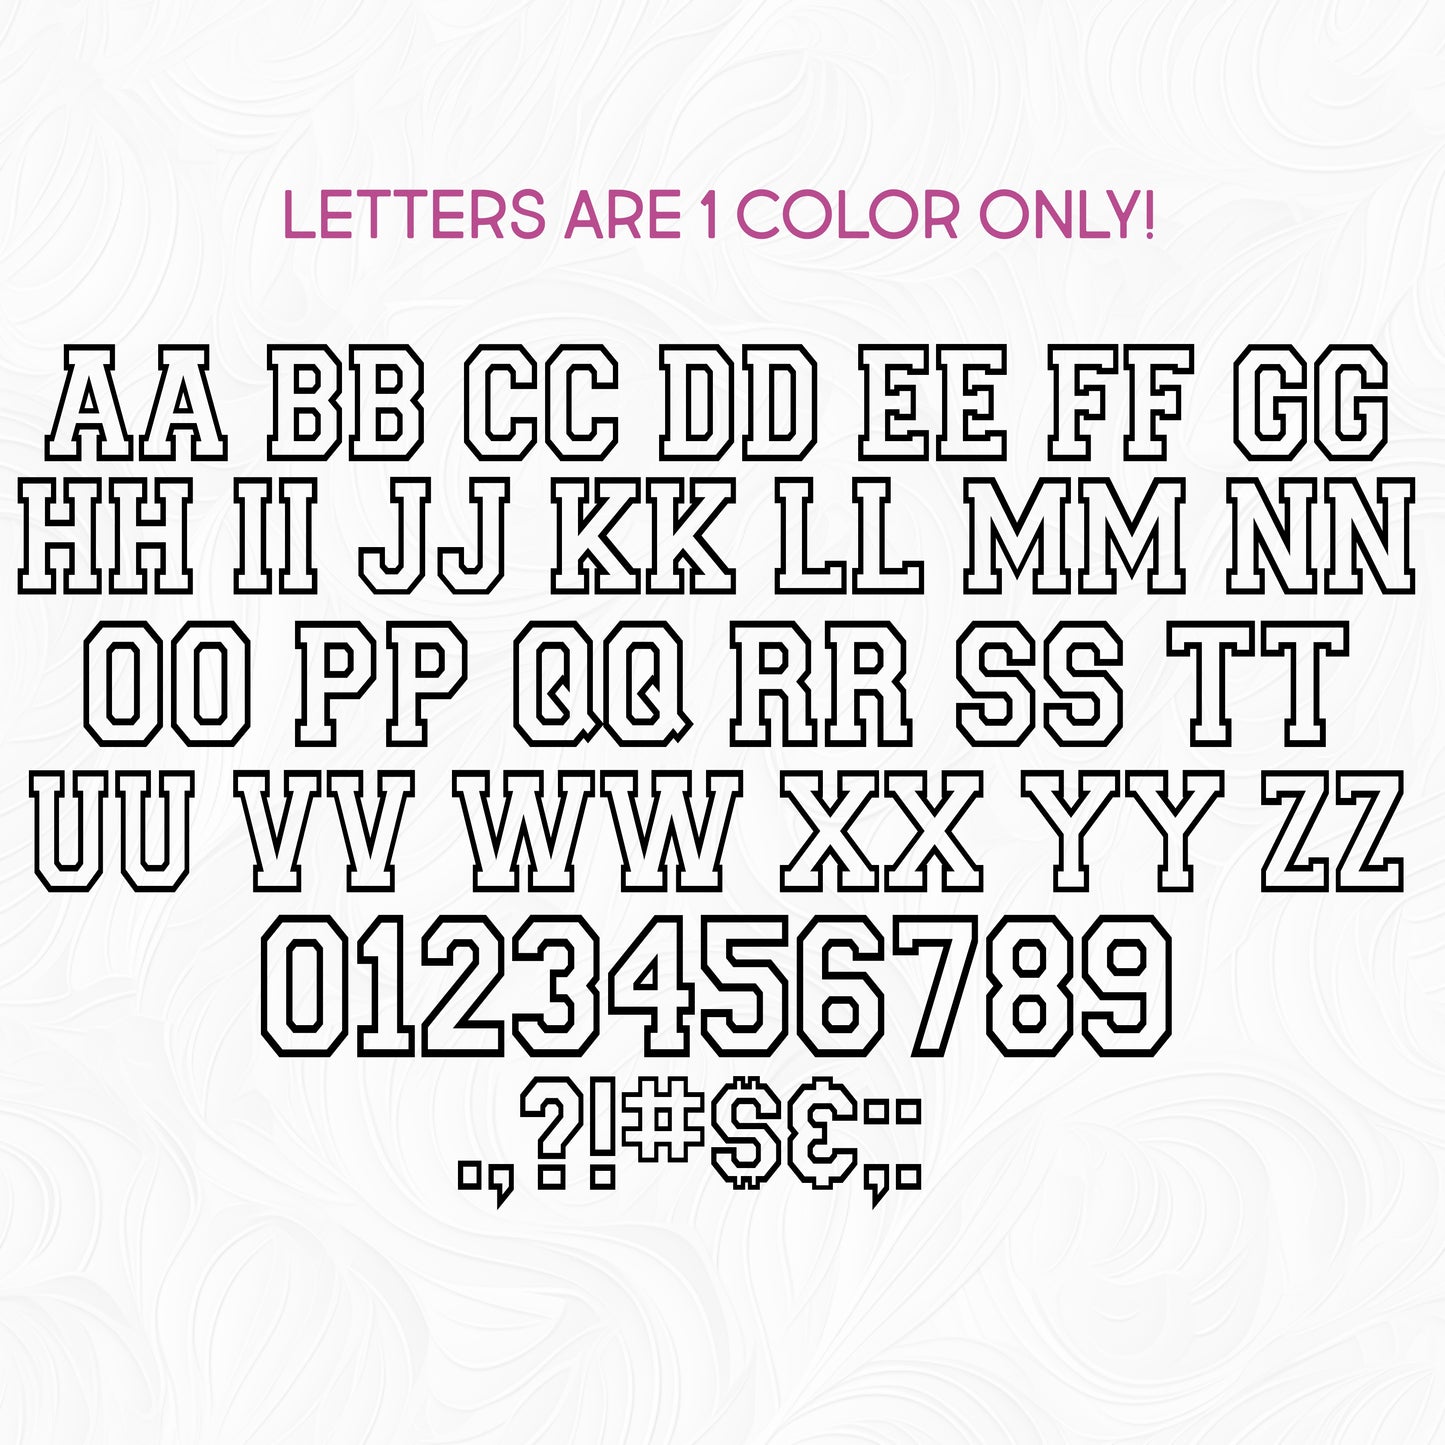 SBS-97-C04 Block Font Custom Lettering Name Text Iron-On Transfer or Sticker